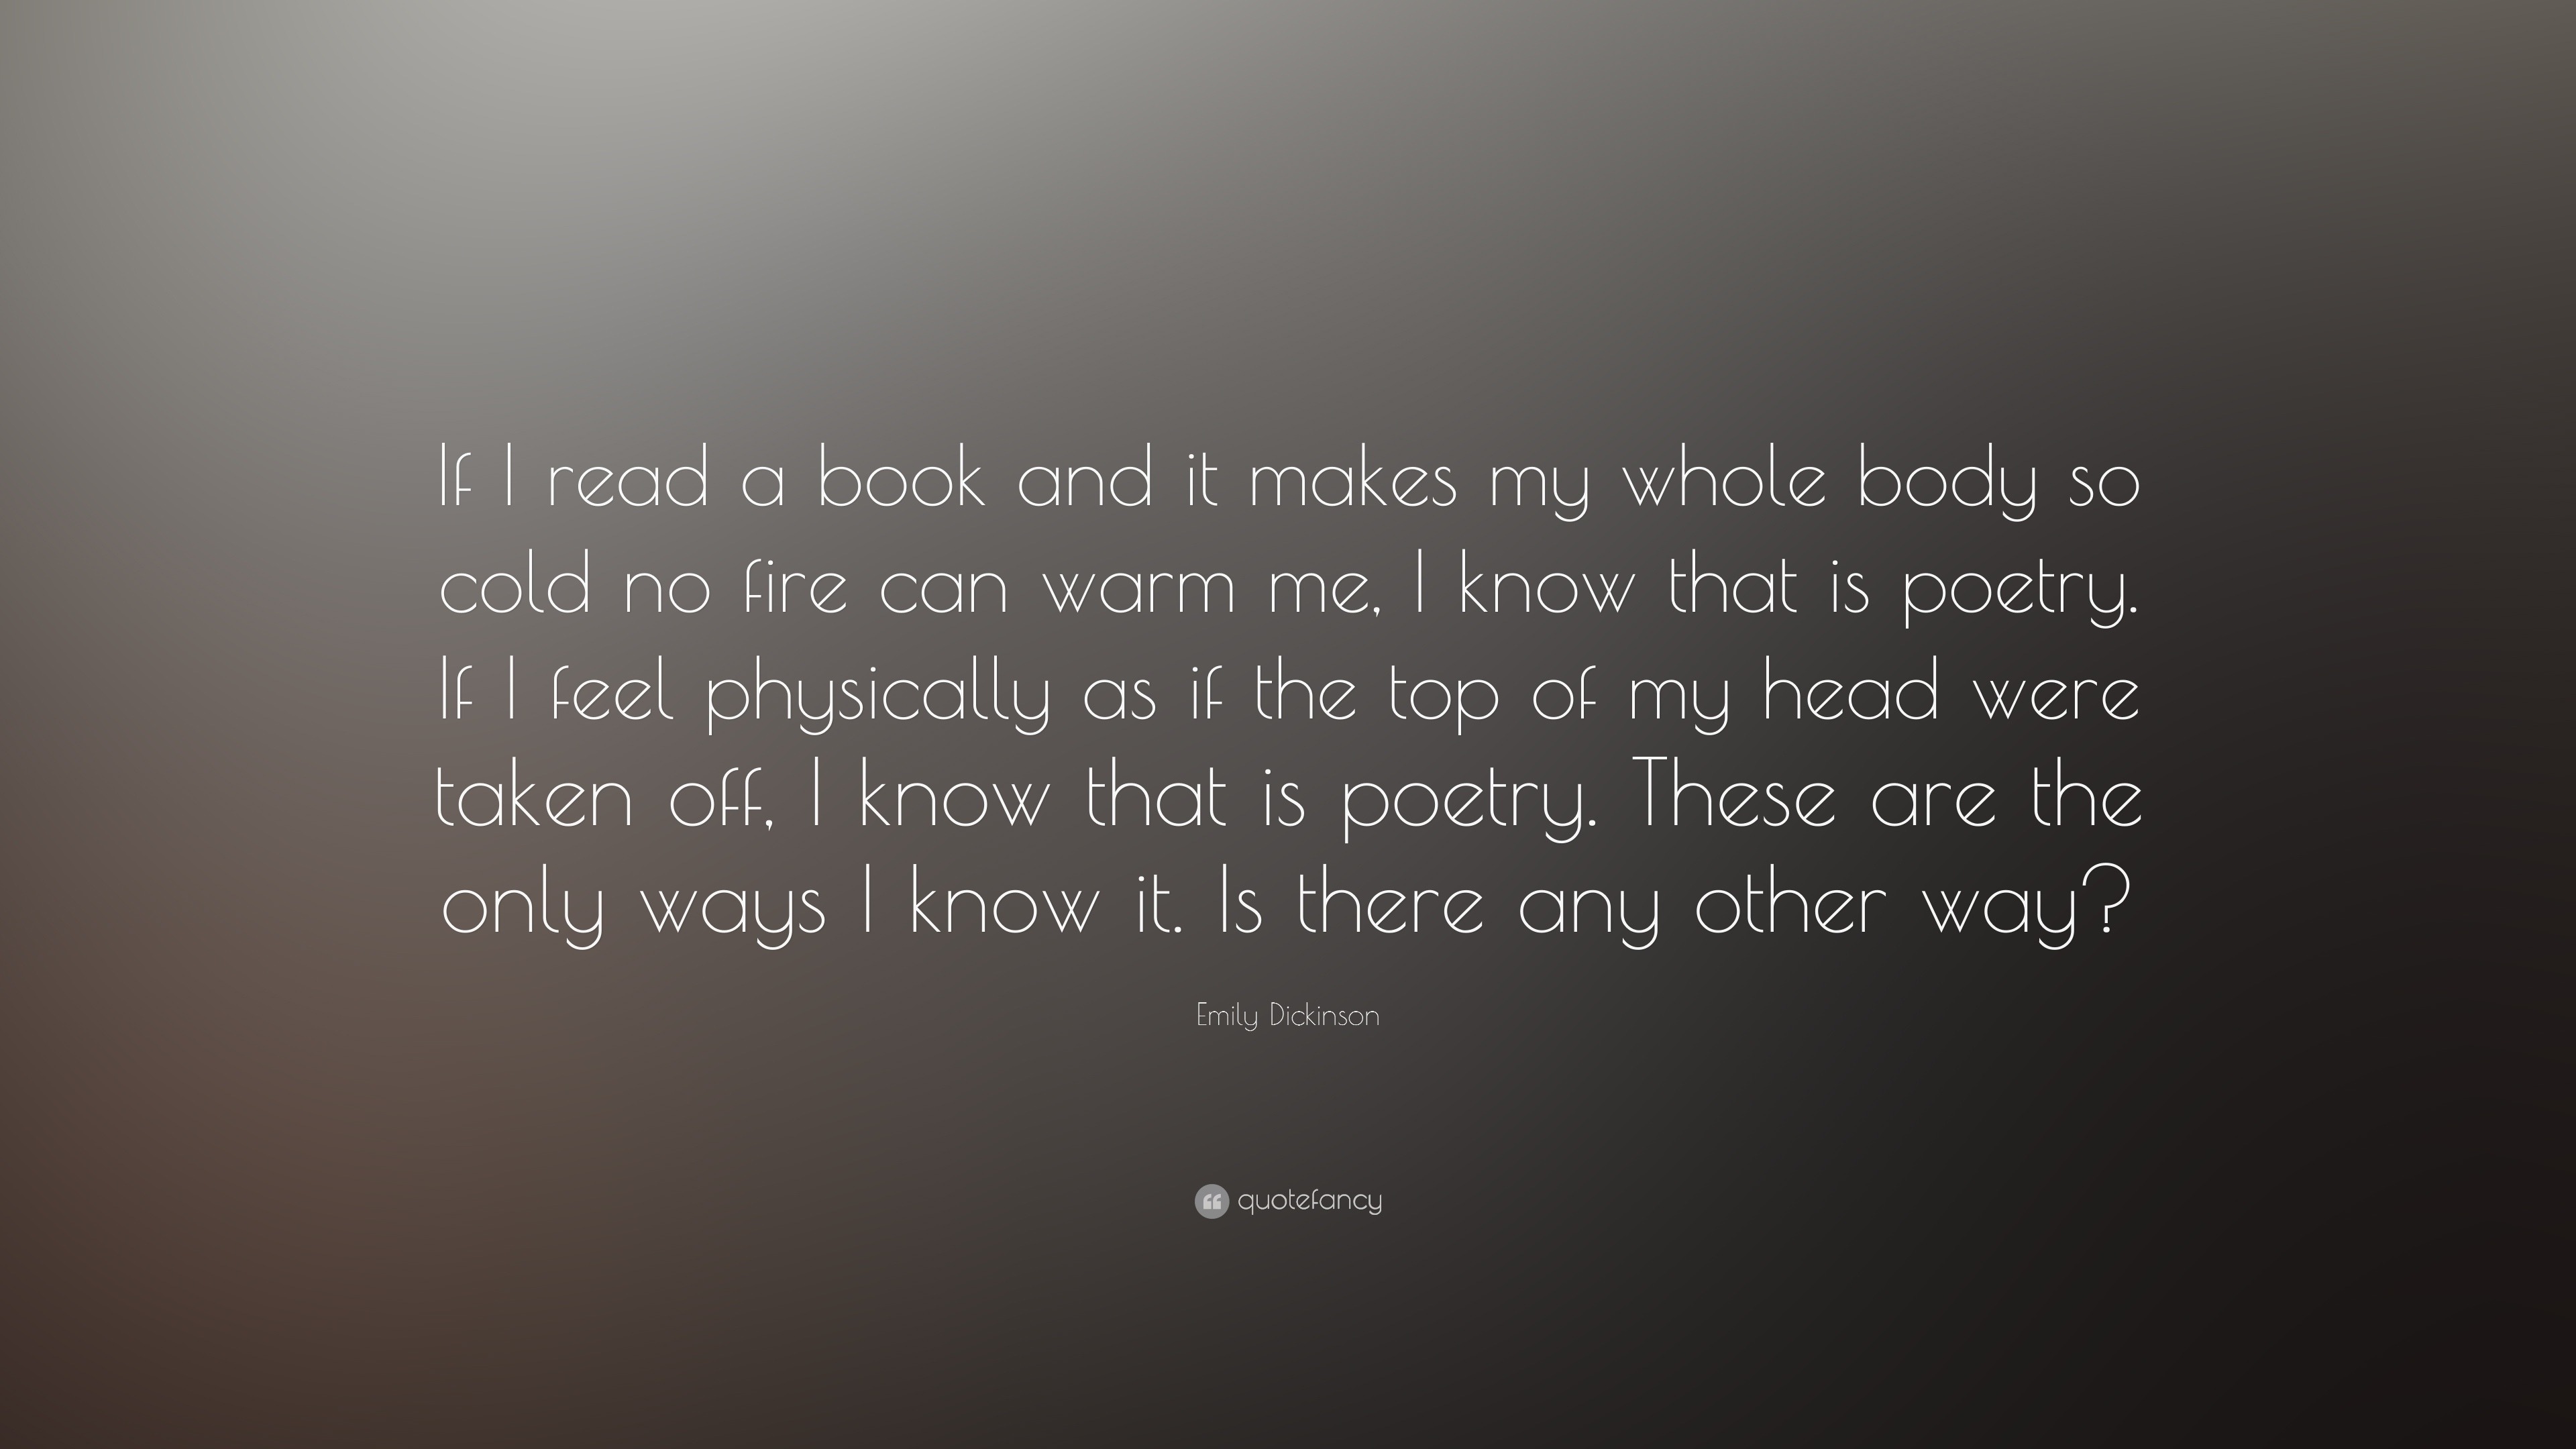 Emily Dickinson Quote: “If I read a book and it makes my whole body so cold no fire ...